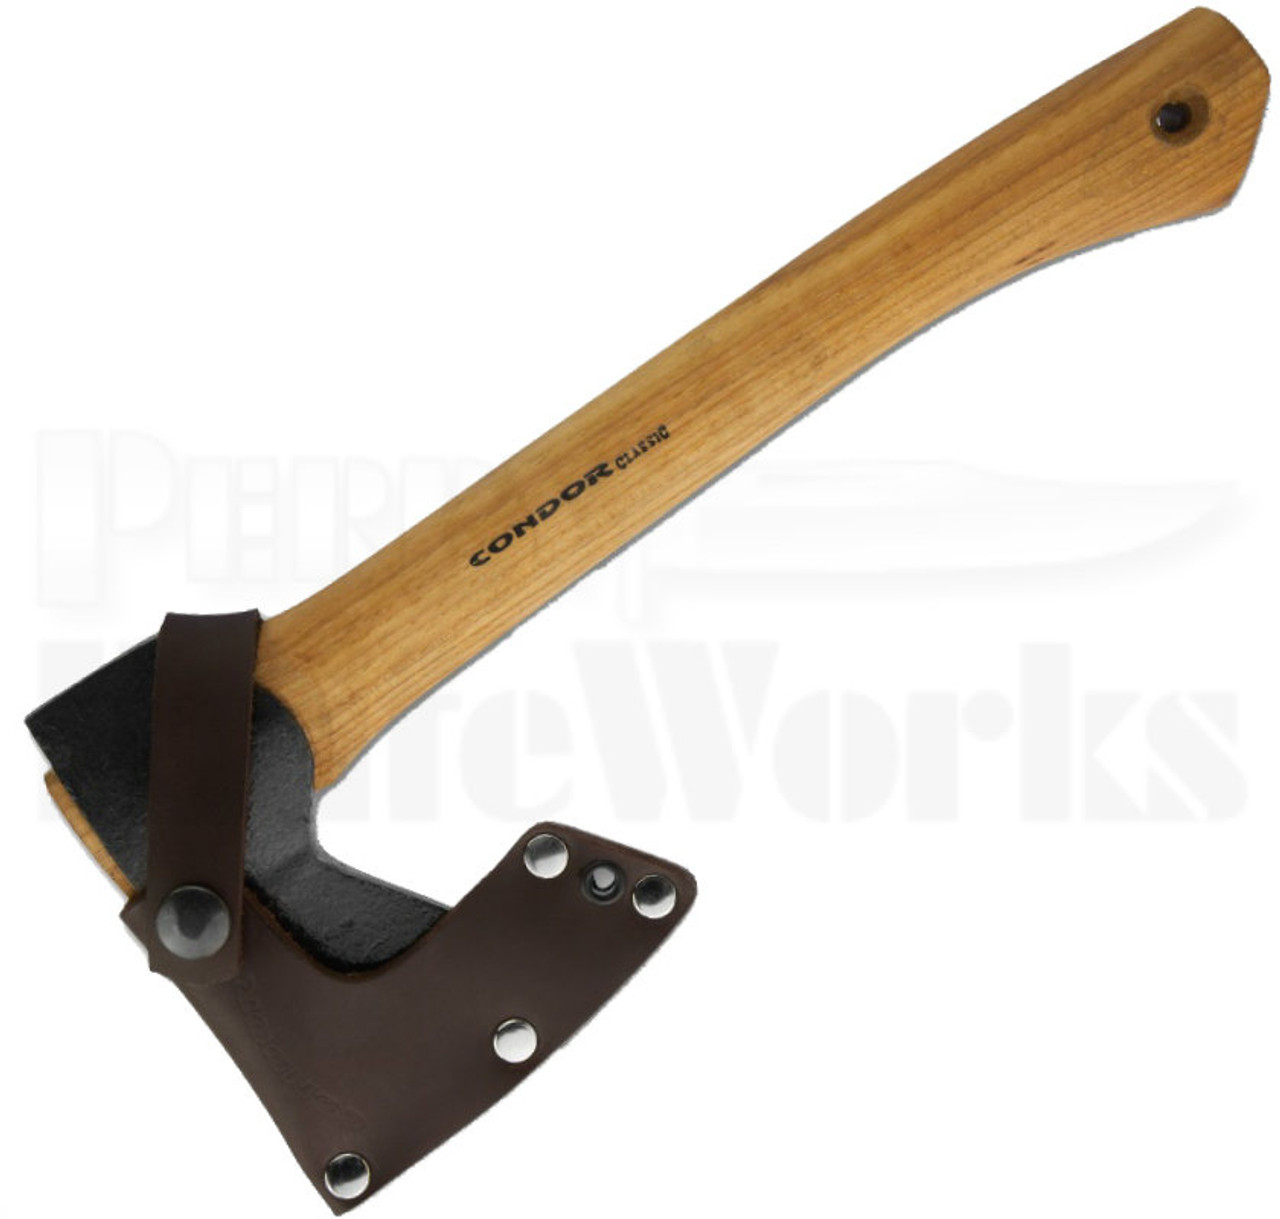 Condor Tool & Knife Scout Hatchet (Hickory)